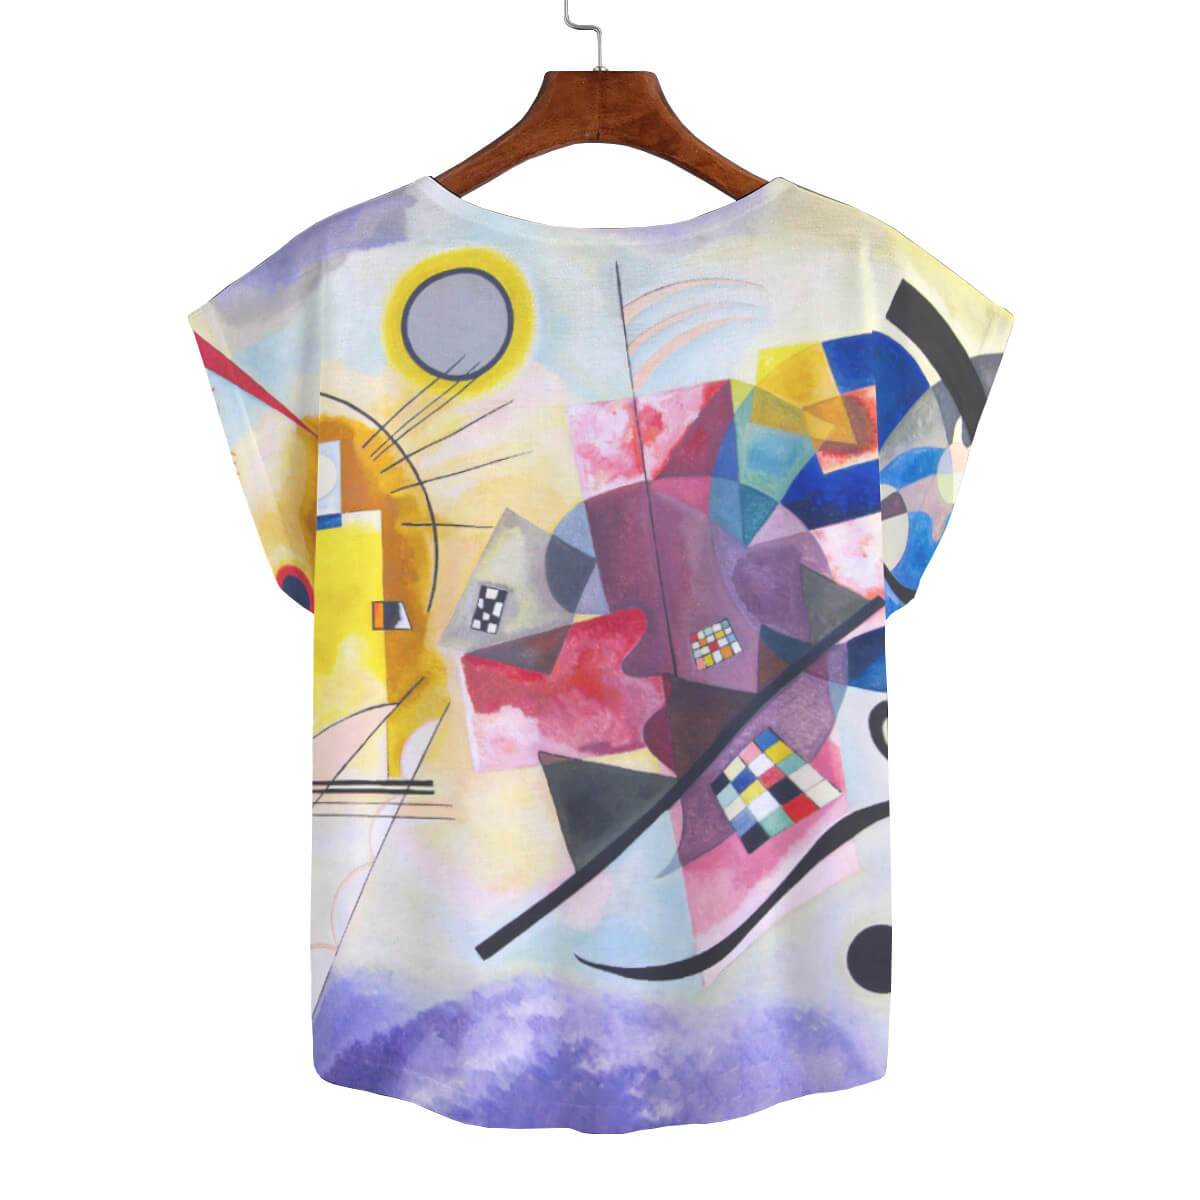 Plus-size t-shirt with Kandinsky-inspired design